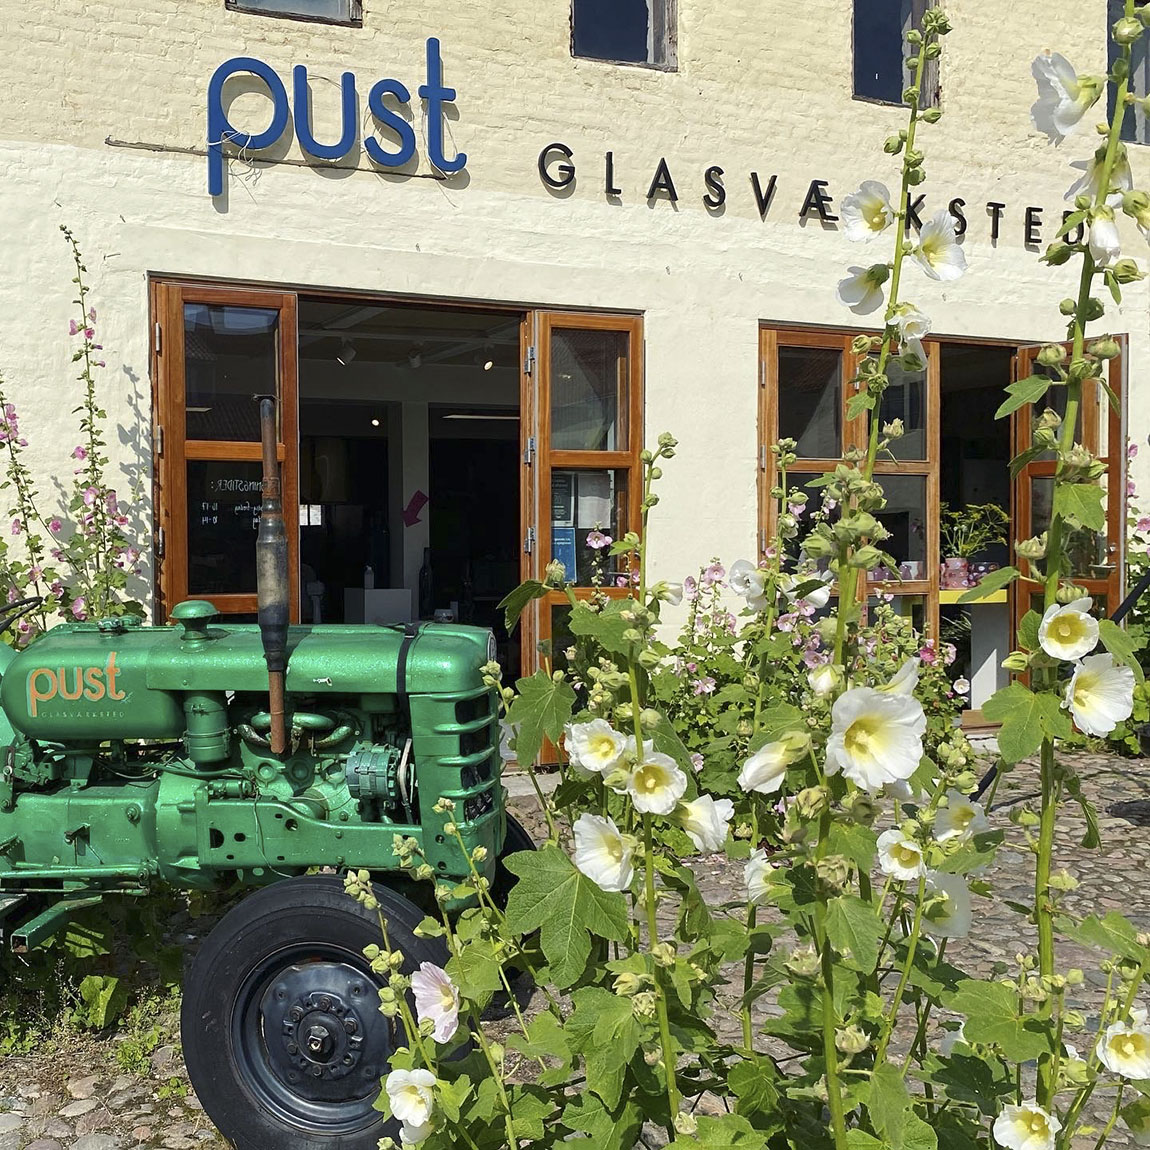 Pust Glas: The Path Ahead is Paved with Glass